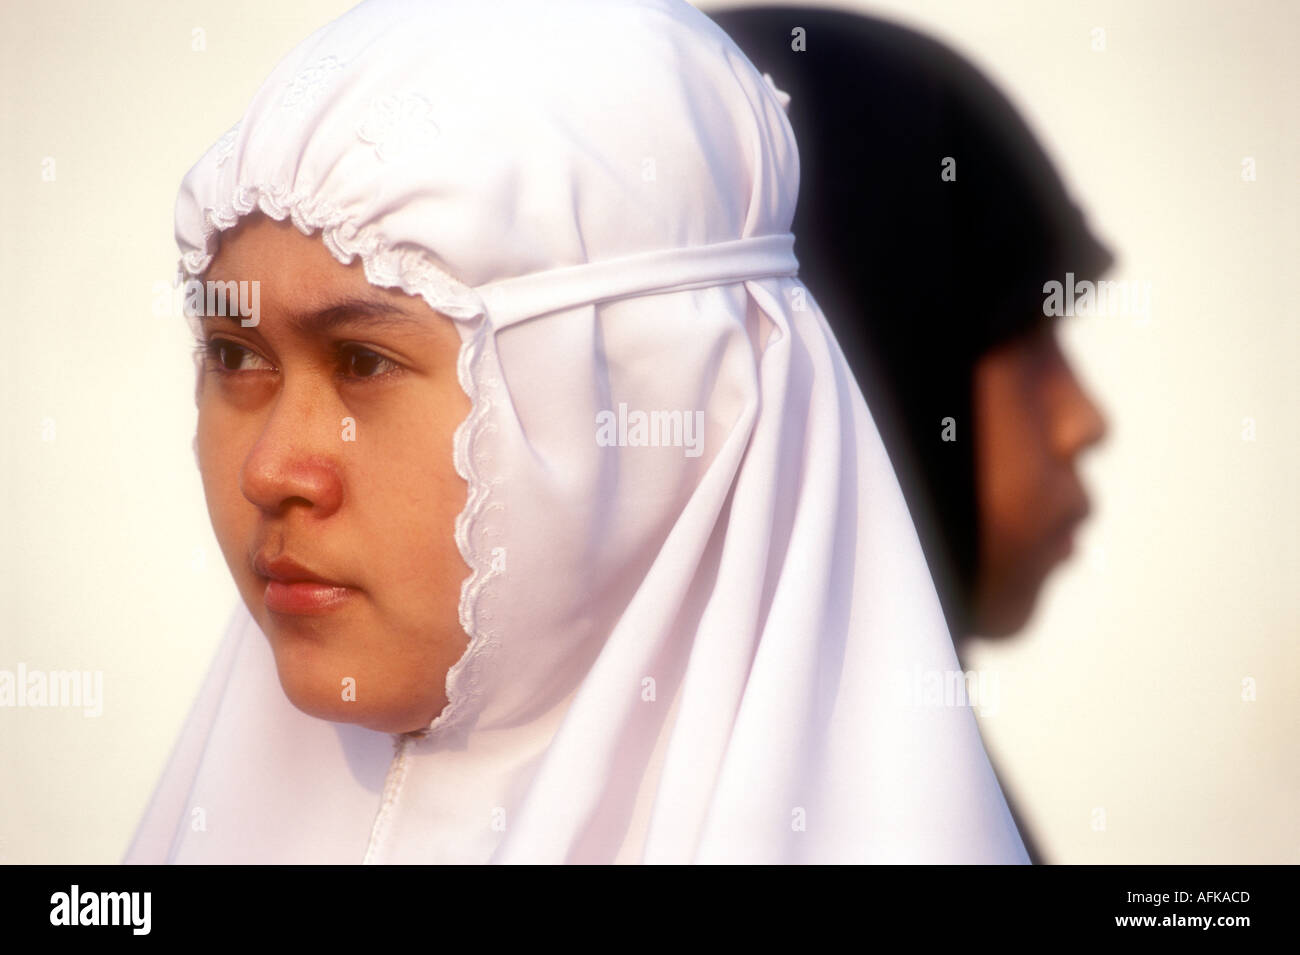 Two Muslim women with traditional head scarves in Java Indonesia Model Released Photo Stock Photo